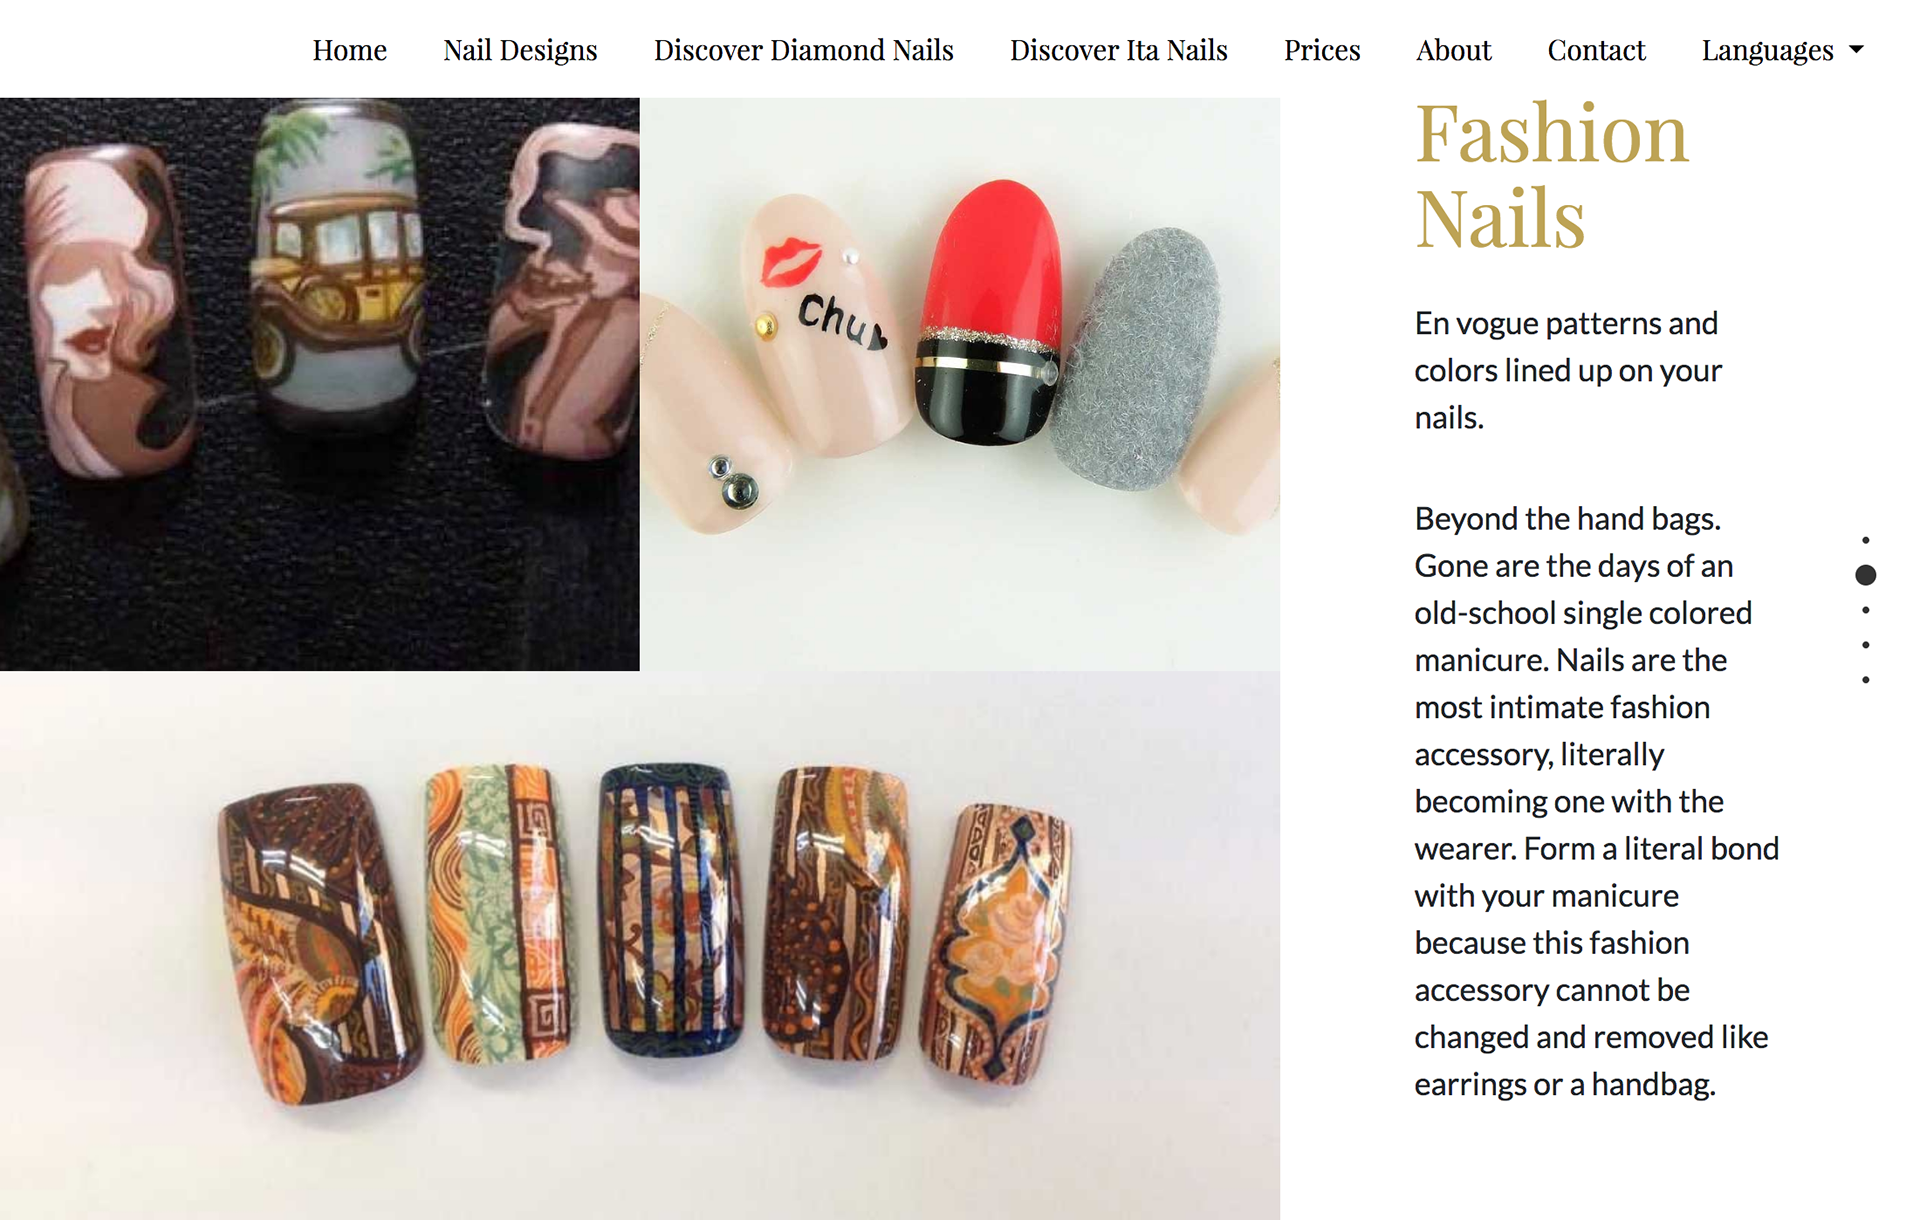 The Fashion Nail page with chic art designs.